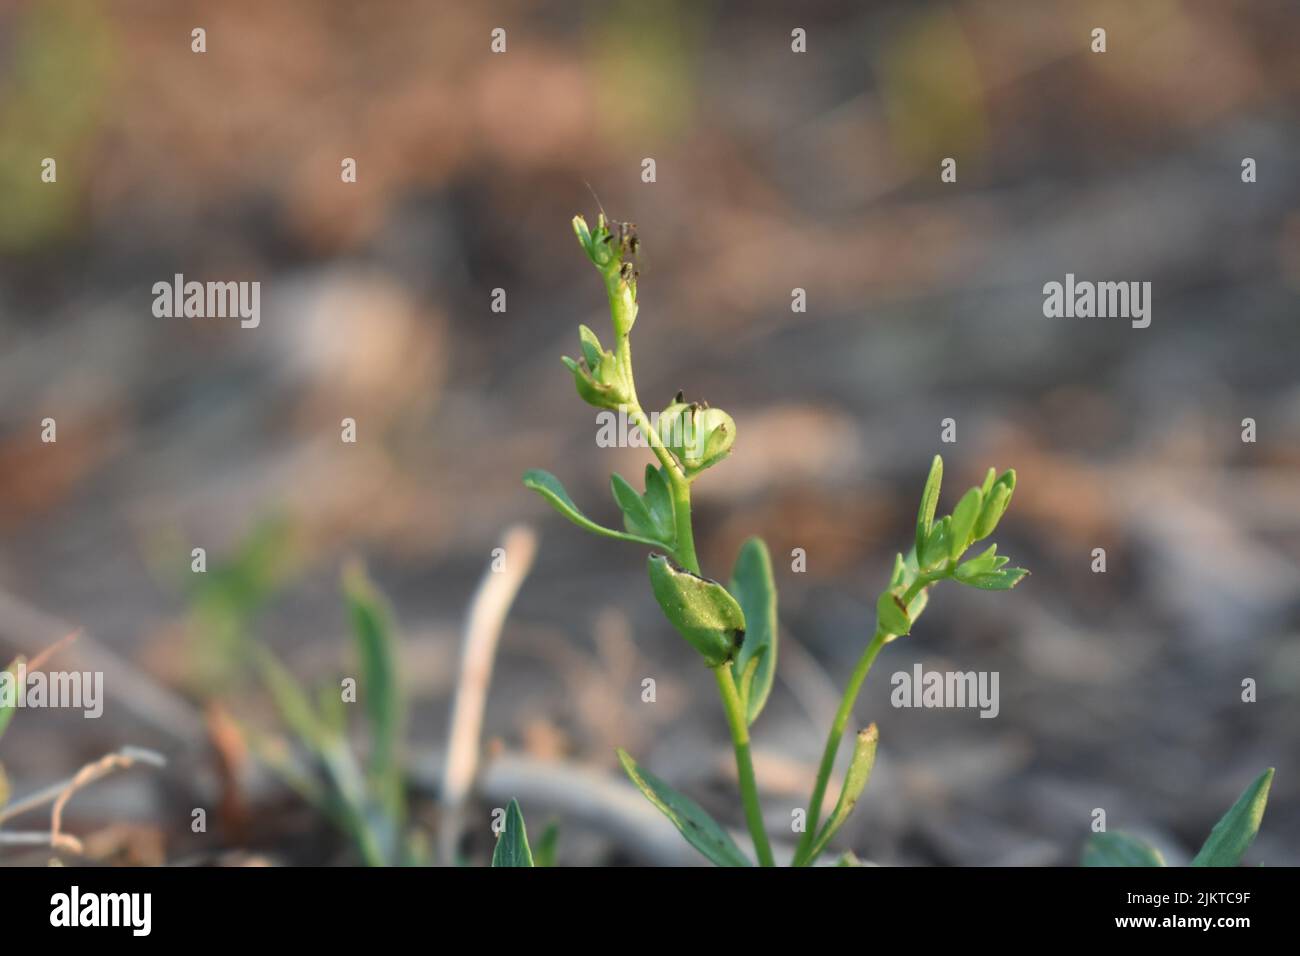 A close up of Thamnosma plant against a blurry background Stock Photo